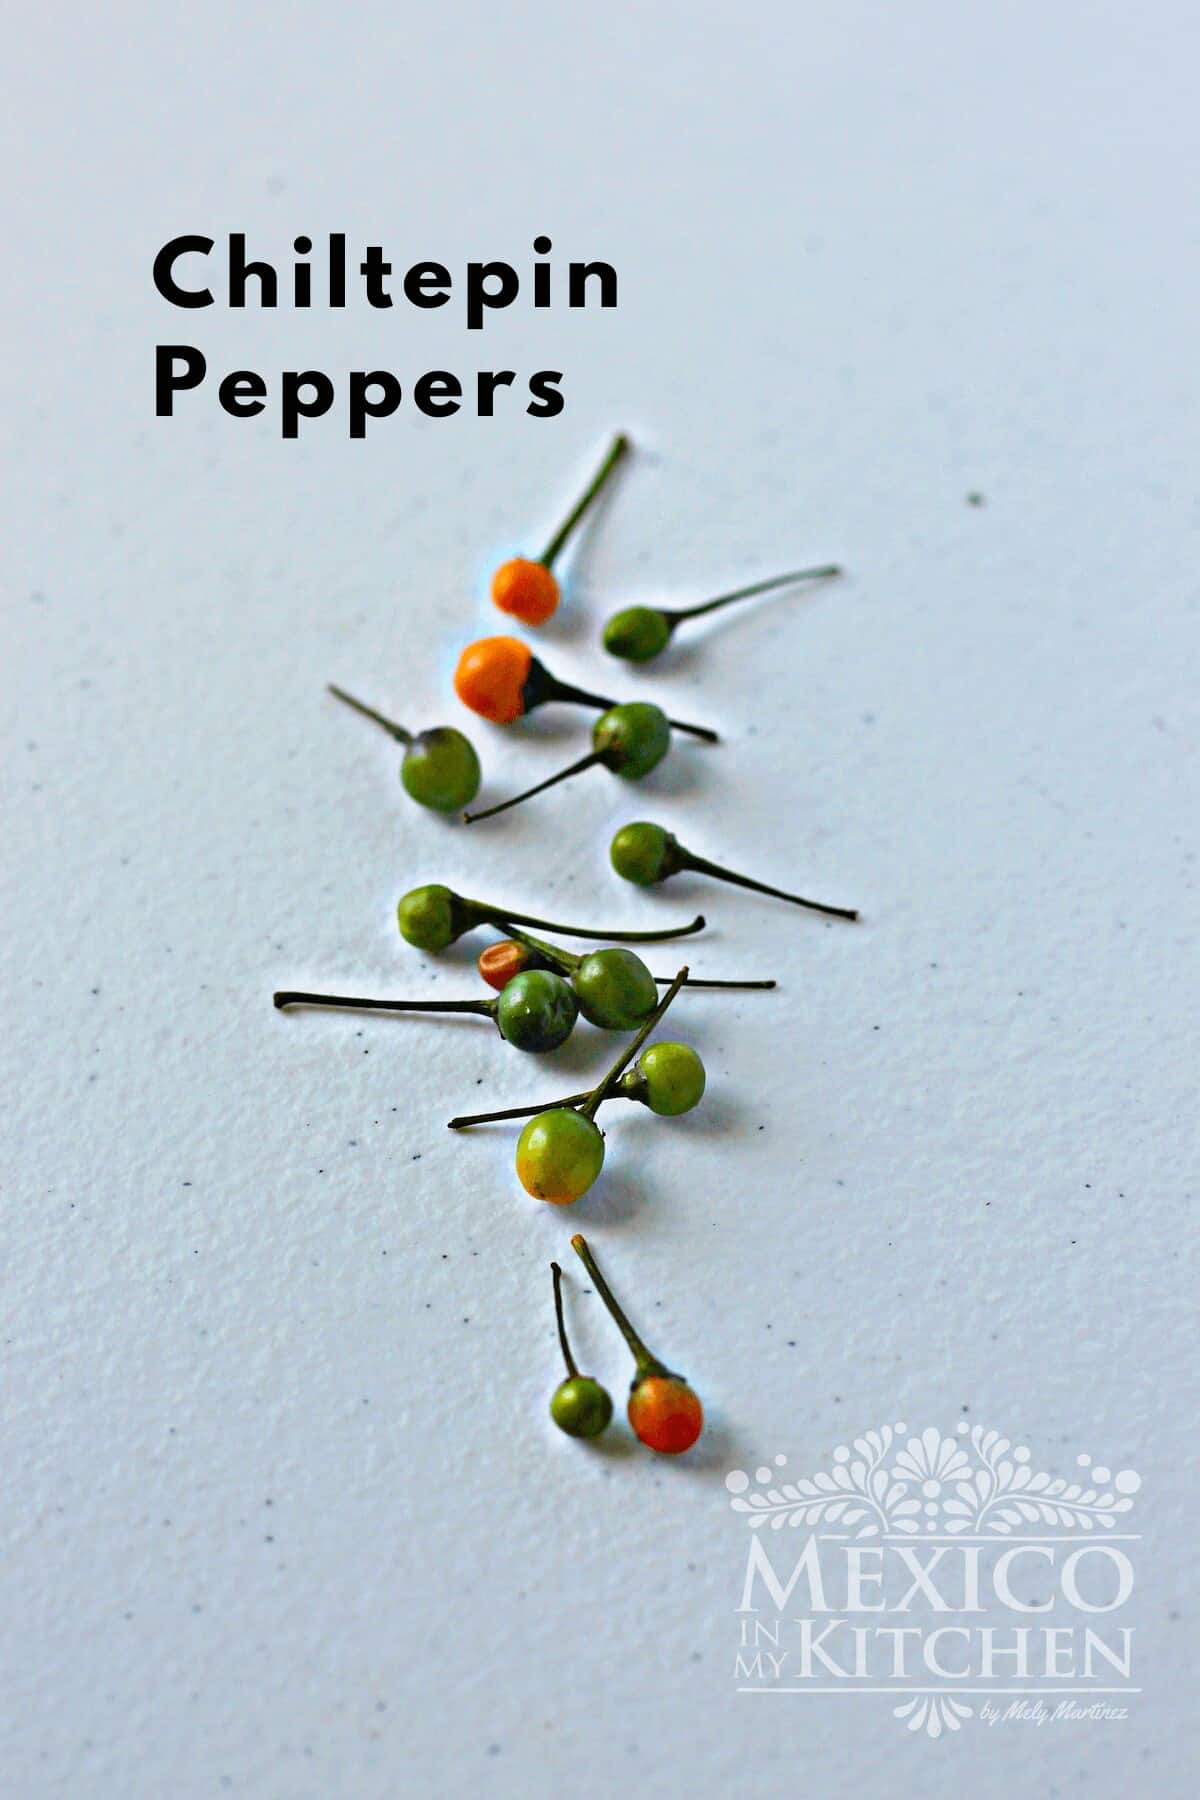 Chiltepin peppers